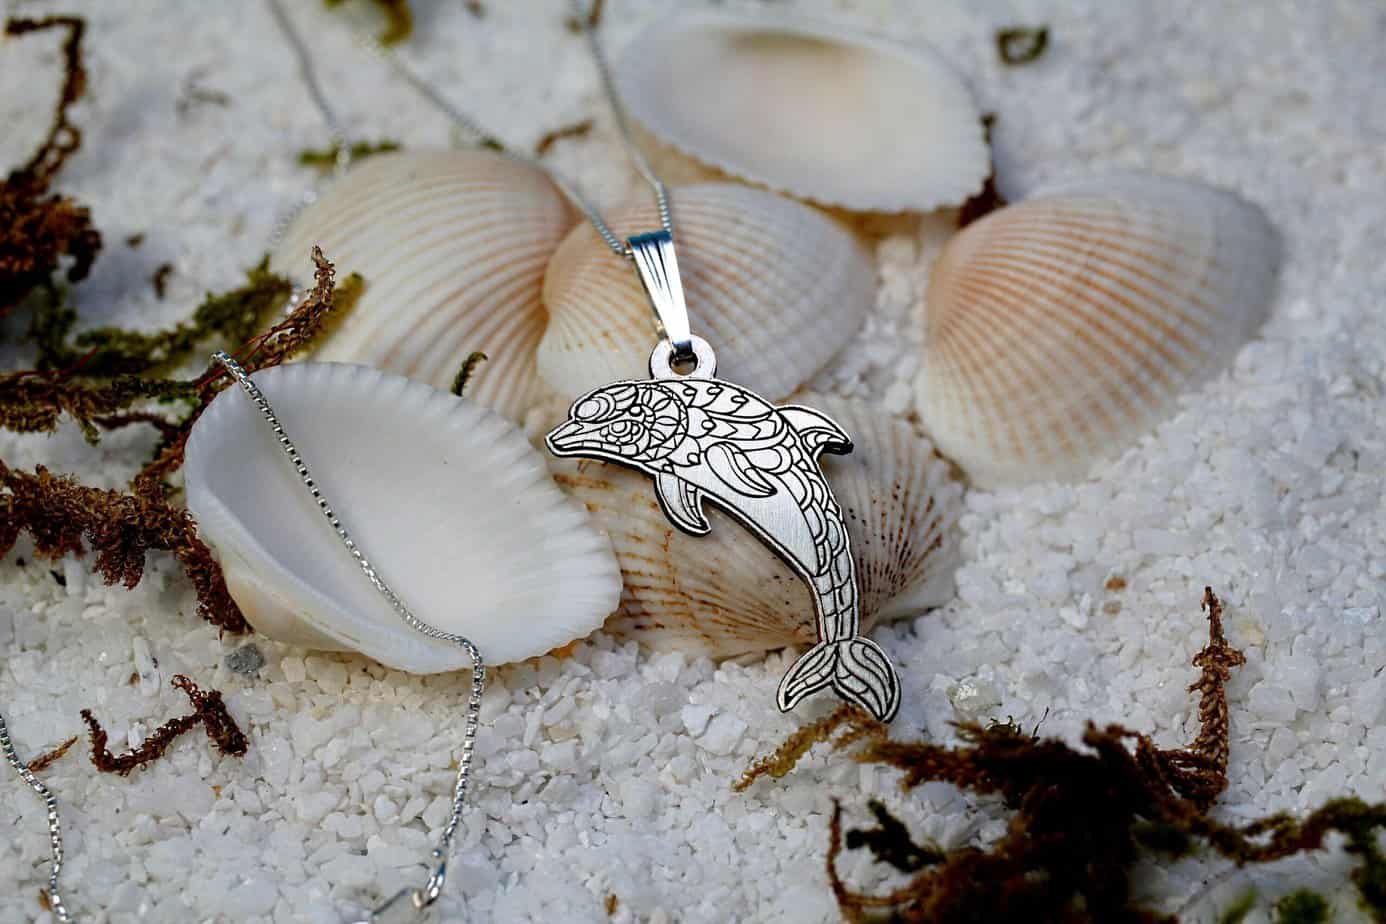 Dolphin Necklace, Cute Golden Jewelry, Animal Lover Necklace, Adjustable Pendant Necklace, Beach Wedding, Ocean Jewelry